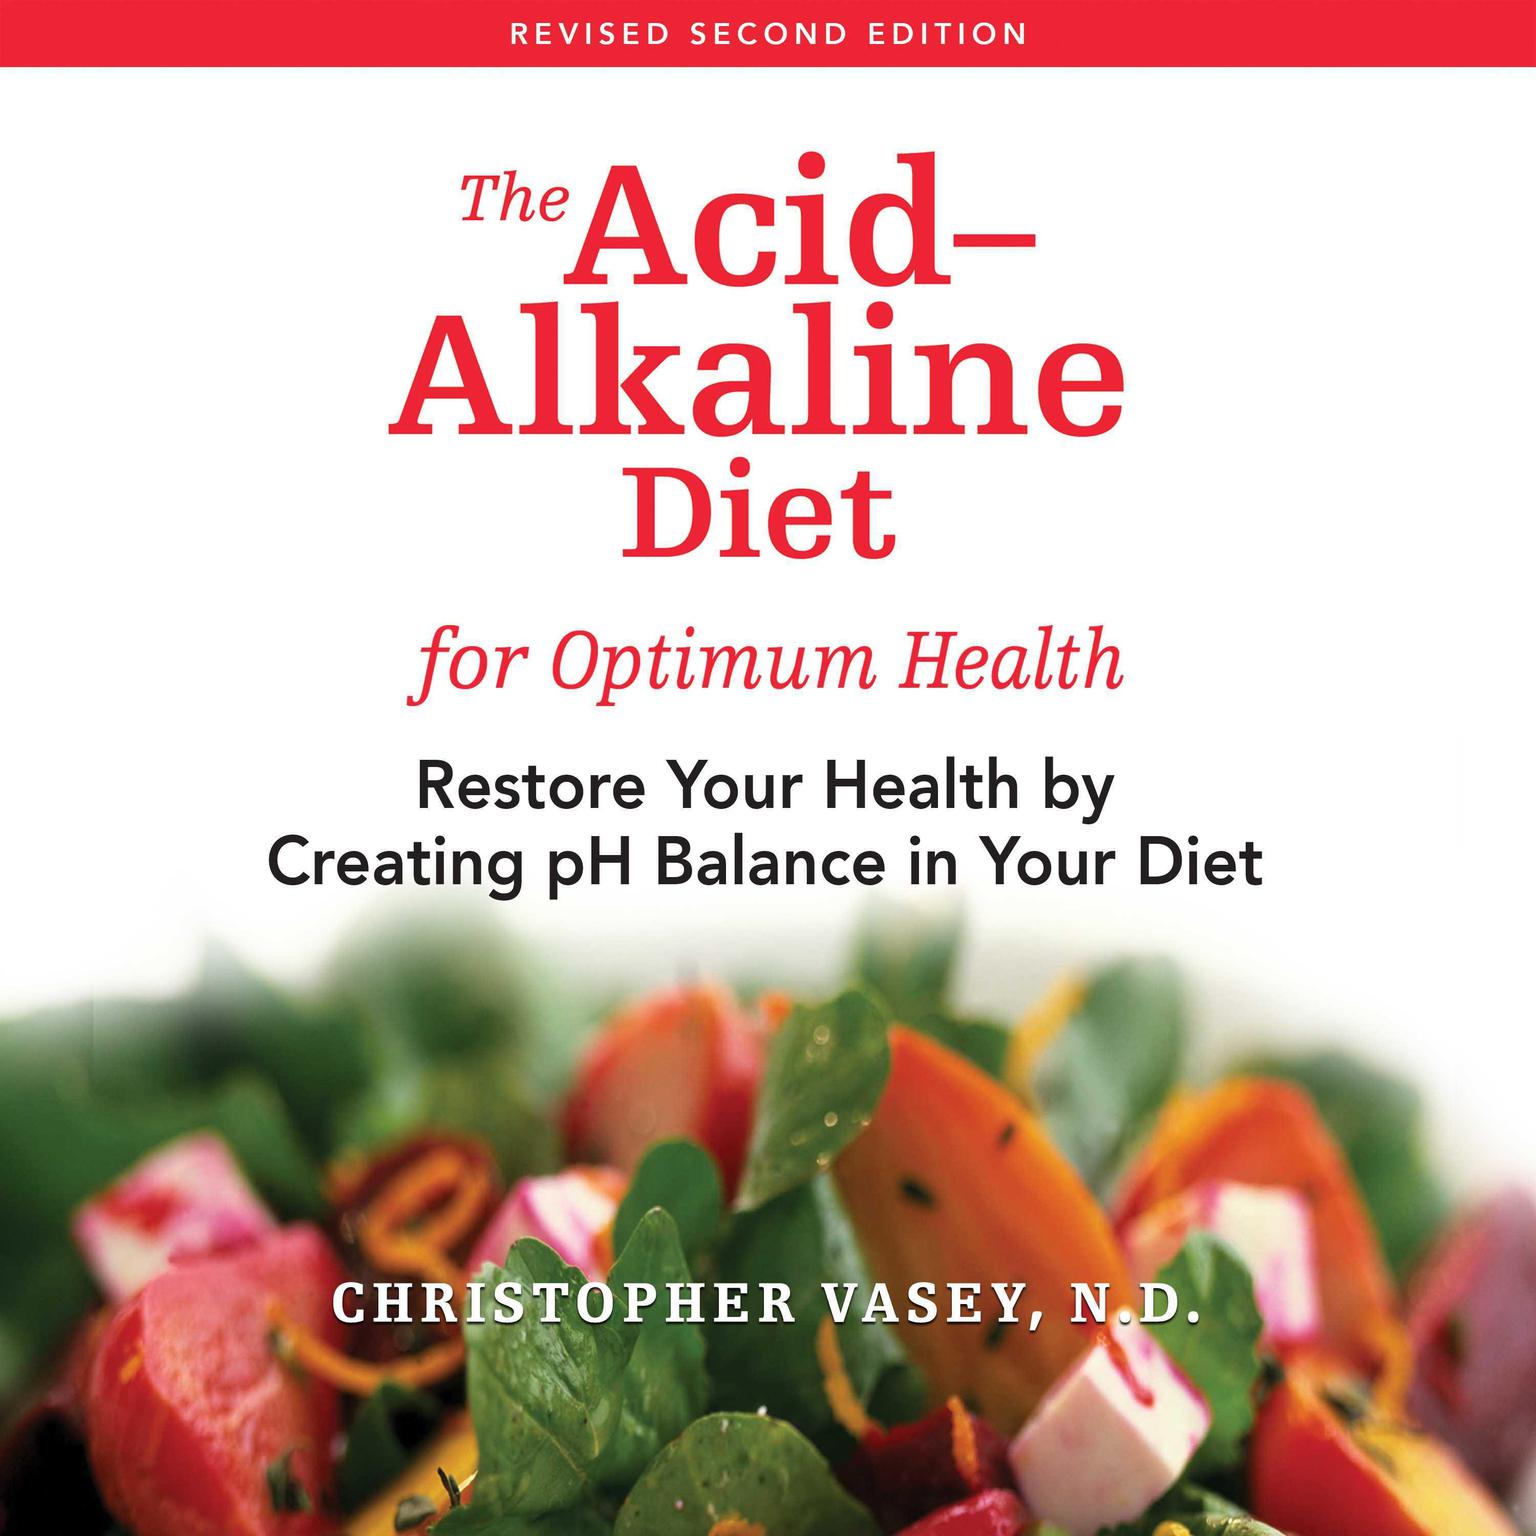 The Acid-Alkaline Diet for Optimum Health: Restore Your Health by Creating pH Balance in Your Diet Audiobook, by Christopher Vasey